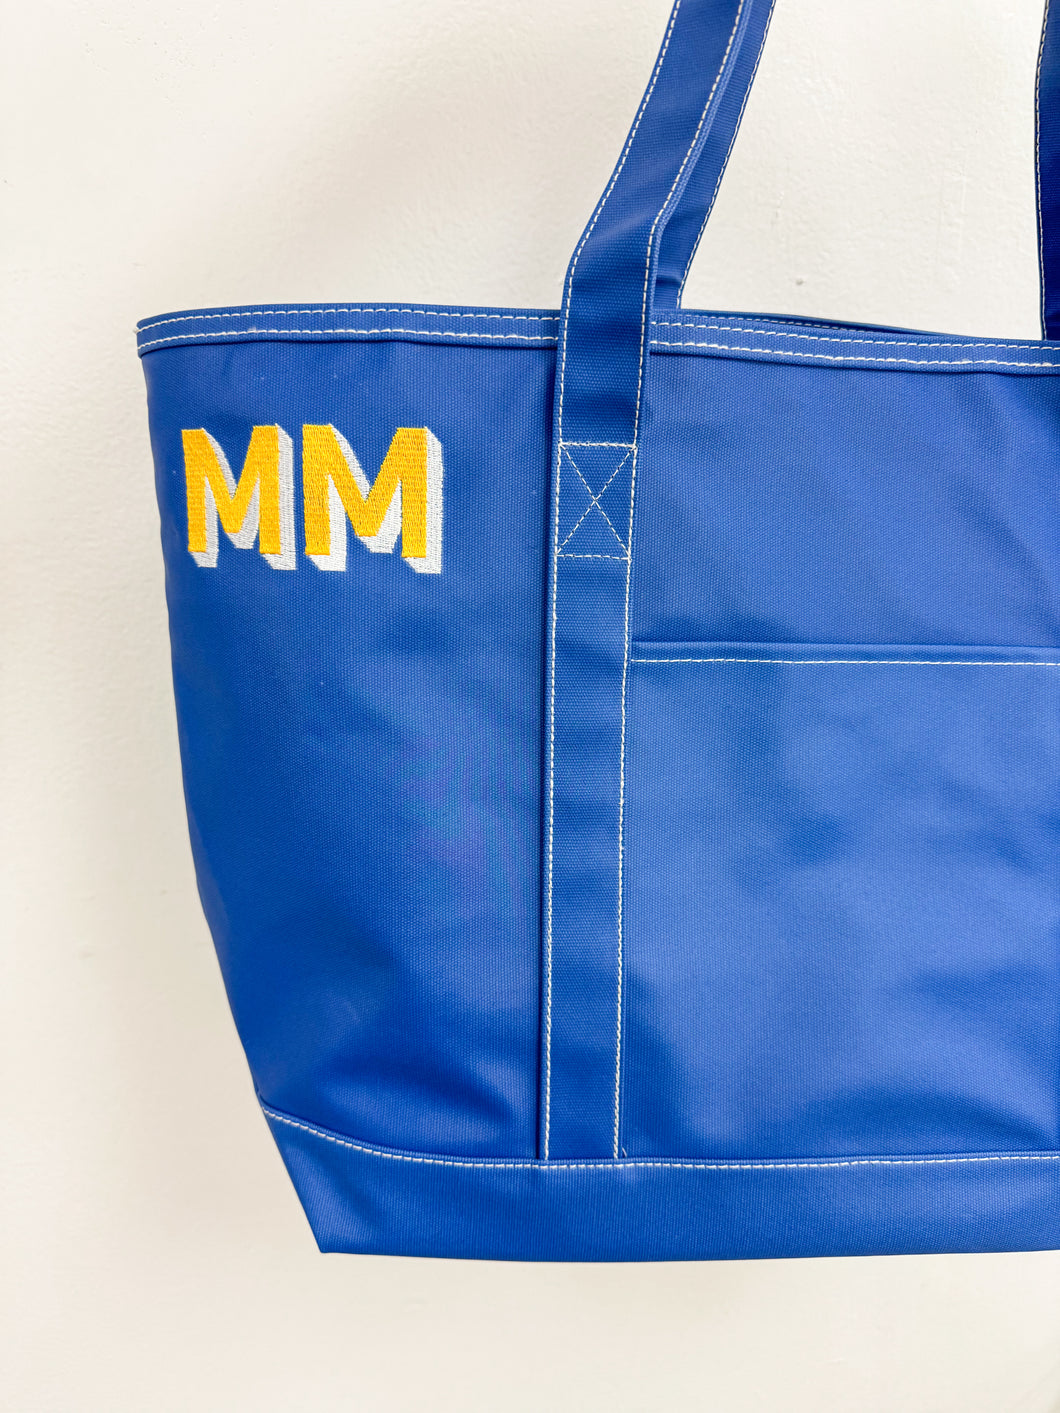 NEW TRVL Coated Canvas Totes